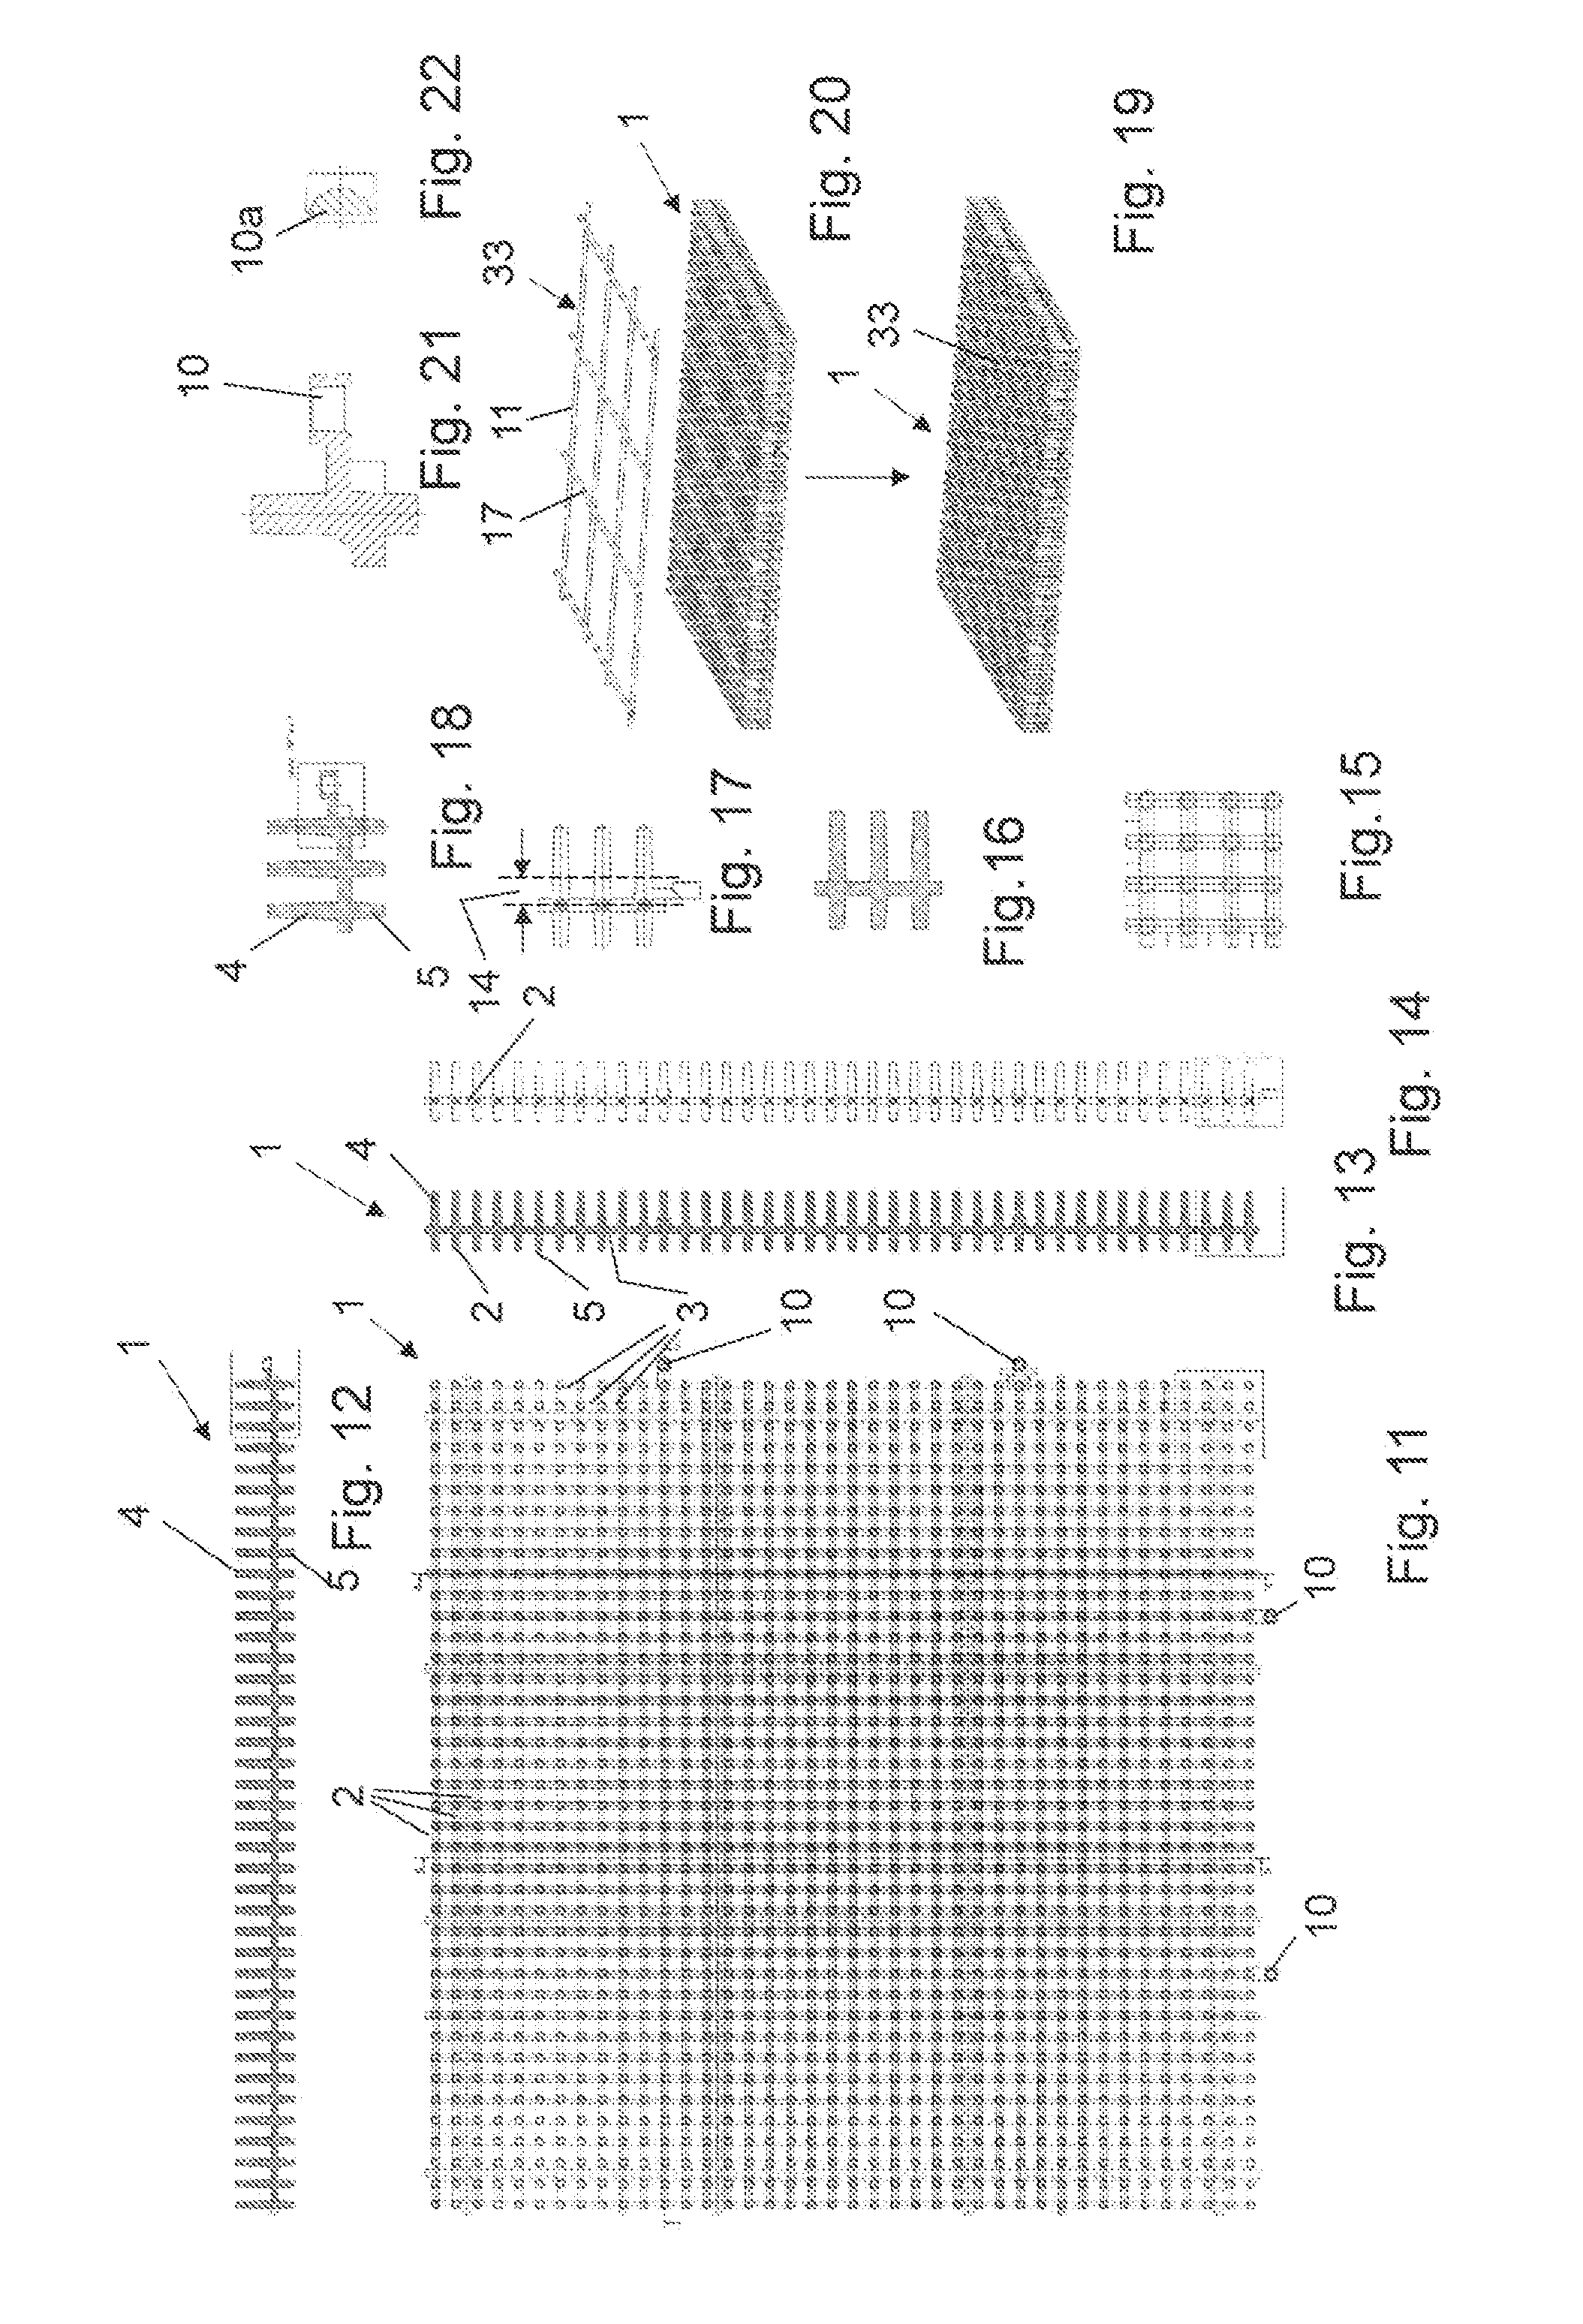 Light-conducting component for constructions and buildings and also production process therefor